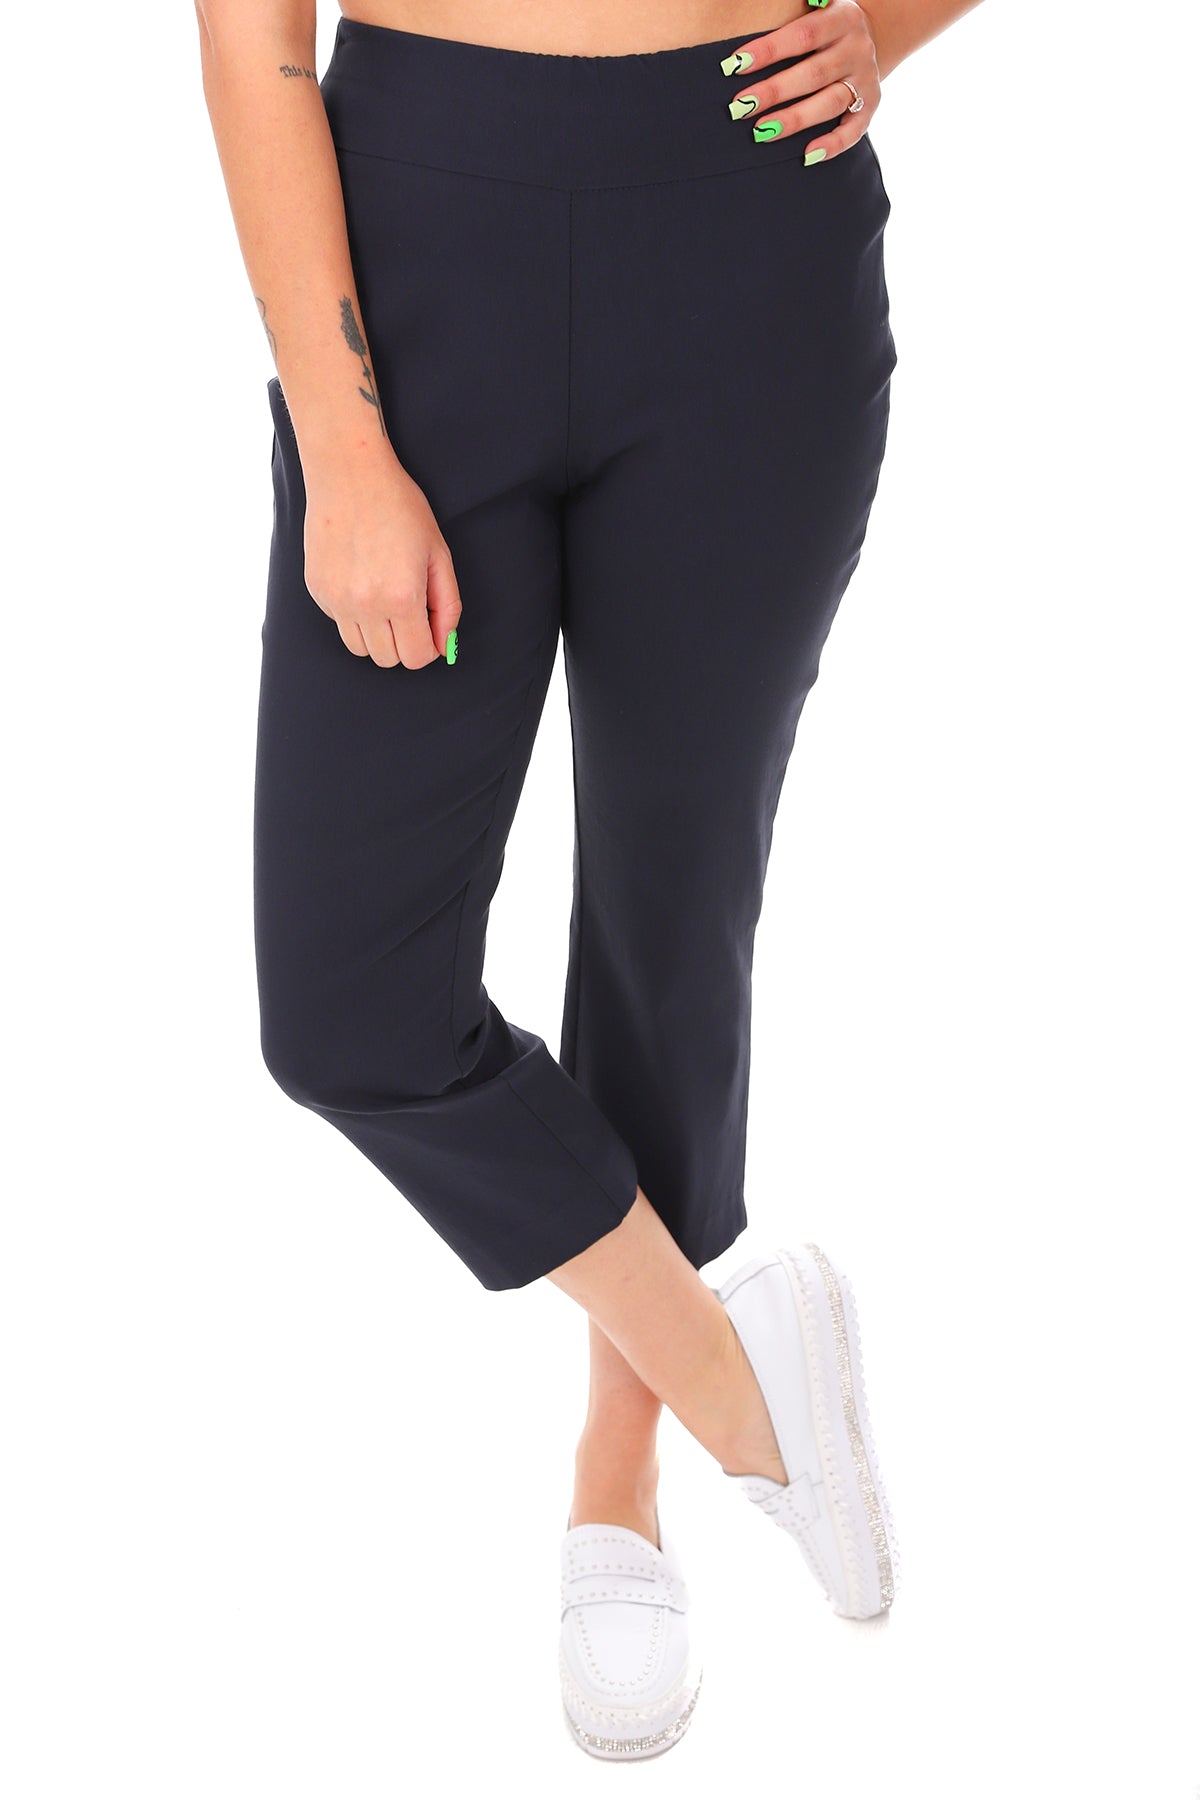 Marco Polo - Pull On Ponte Pants - Black - MP2 - Pizazz Boutique